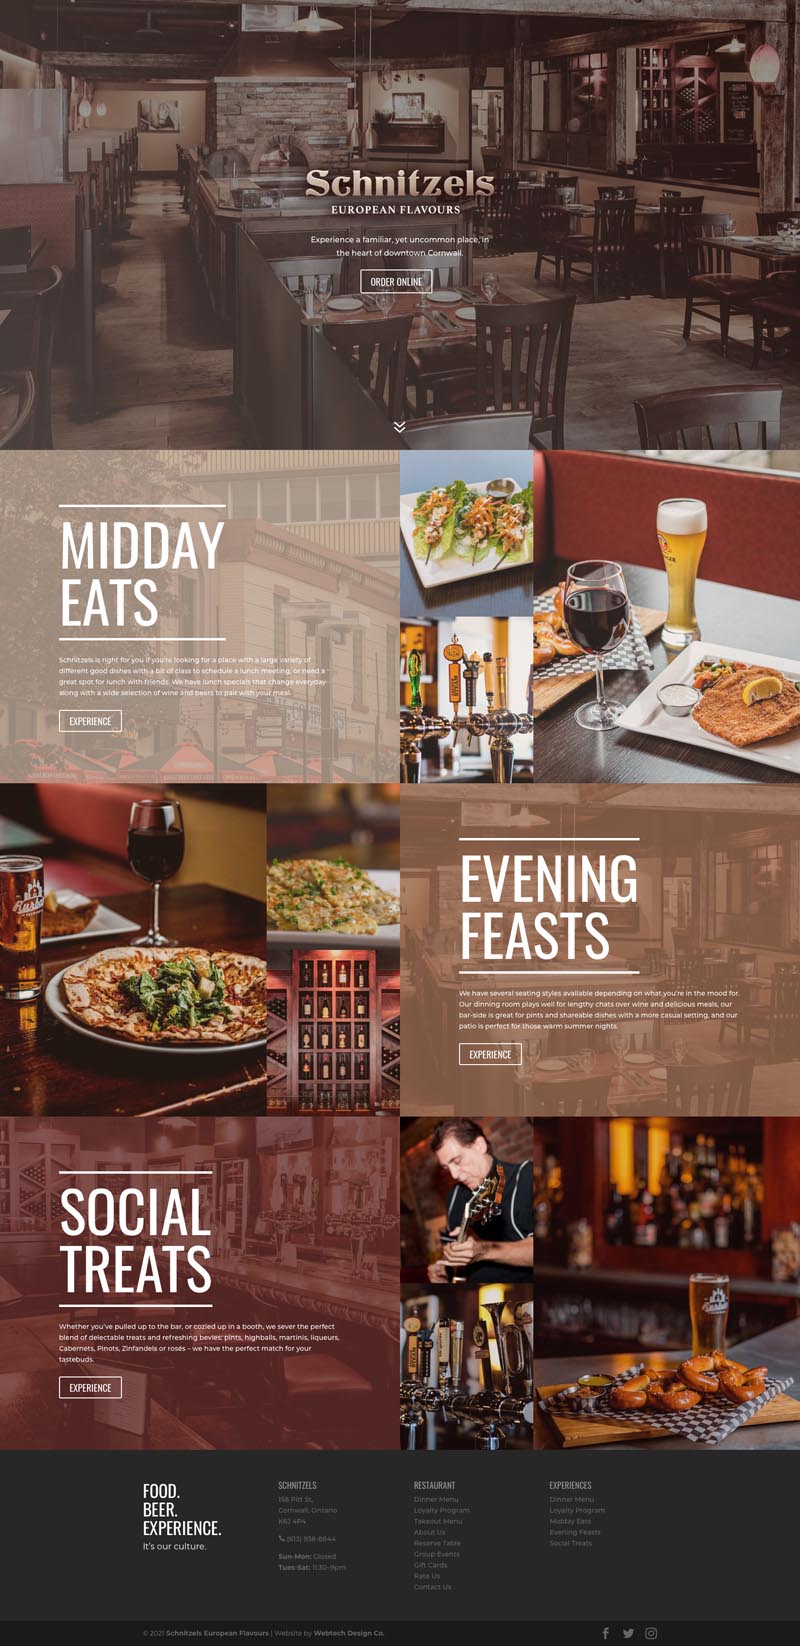 Digital marketing and branding for businesses in Cornwall for Schnitzels restaurant